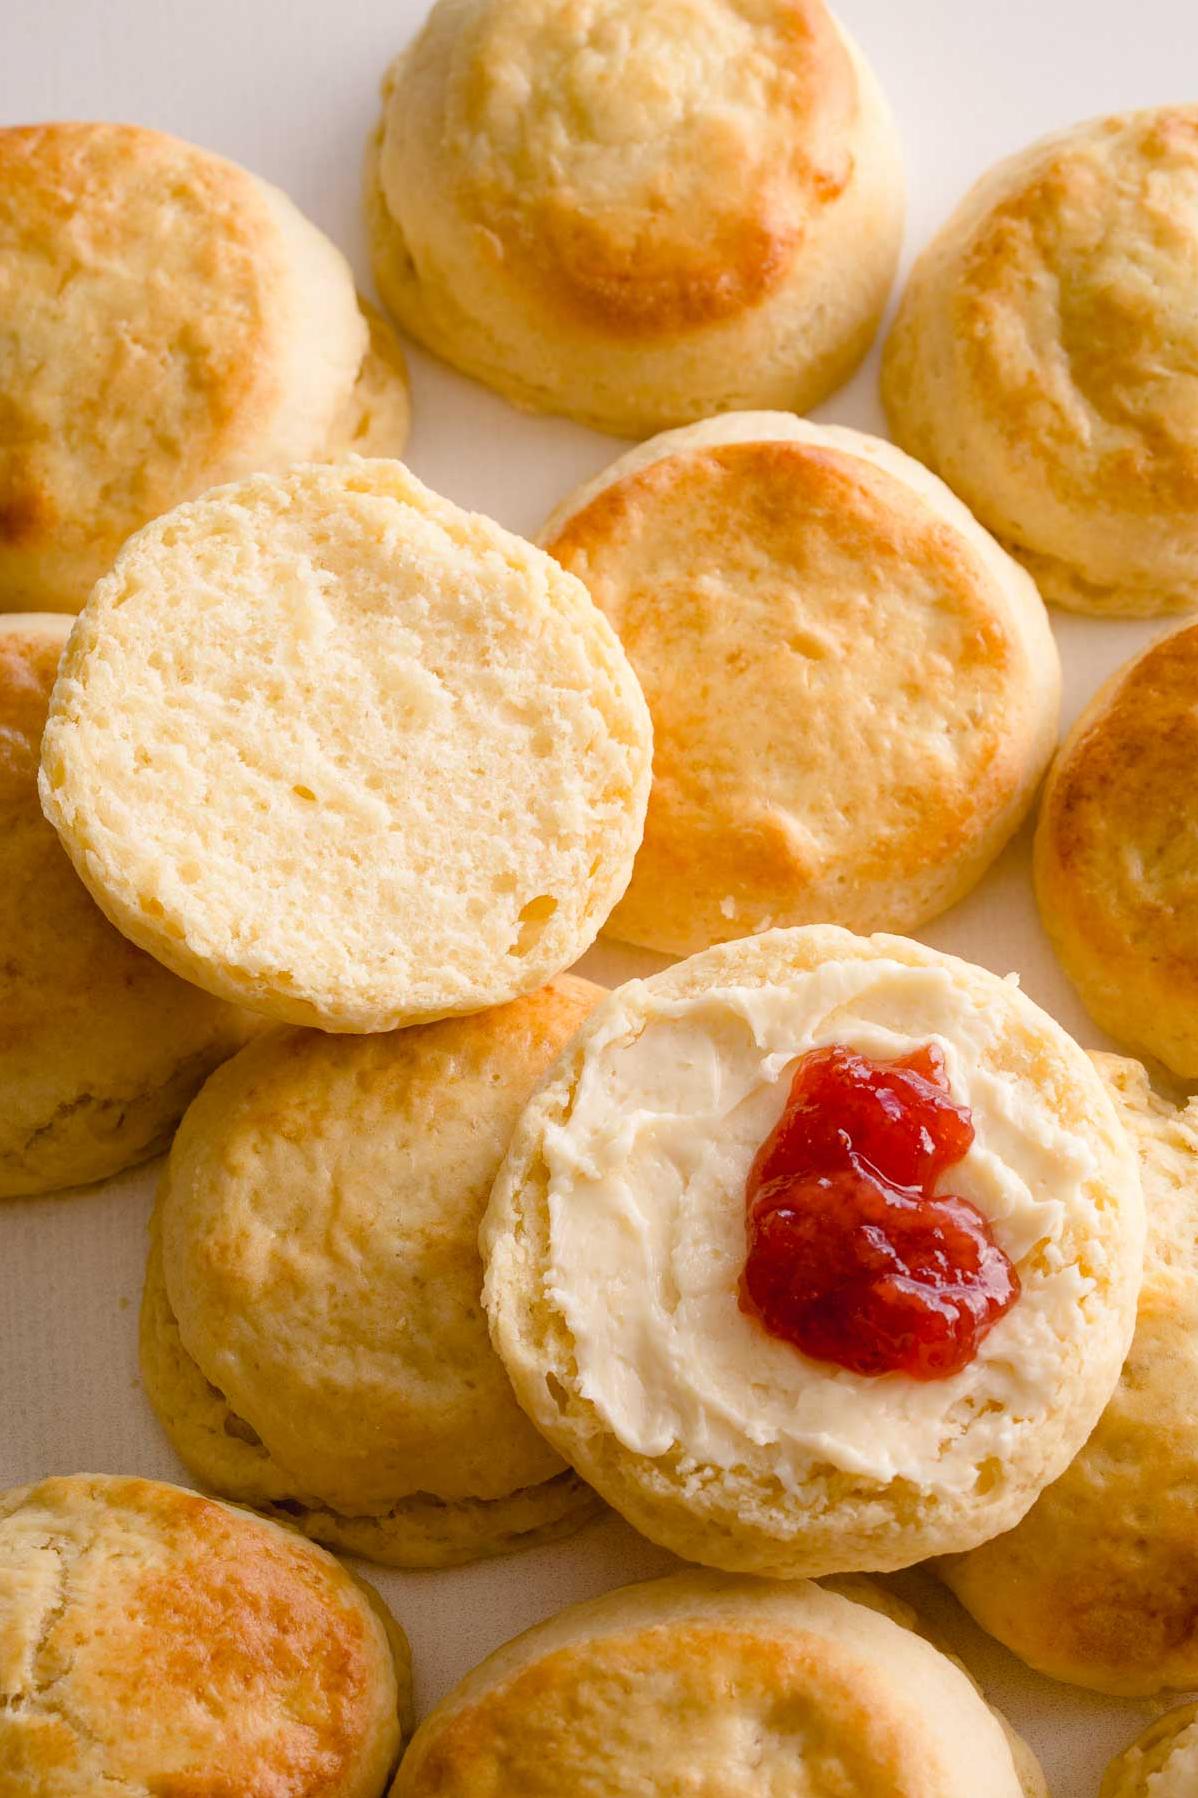  Once you smell these scones baking, you'll never want to buy store-bought ones again.